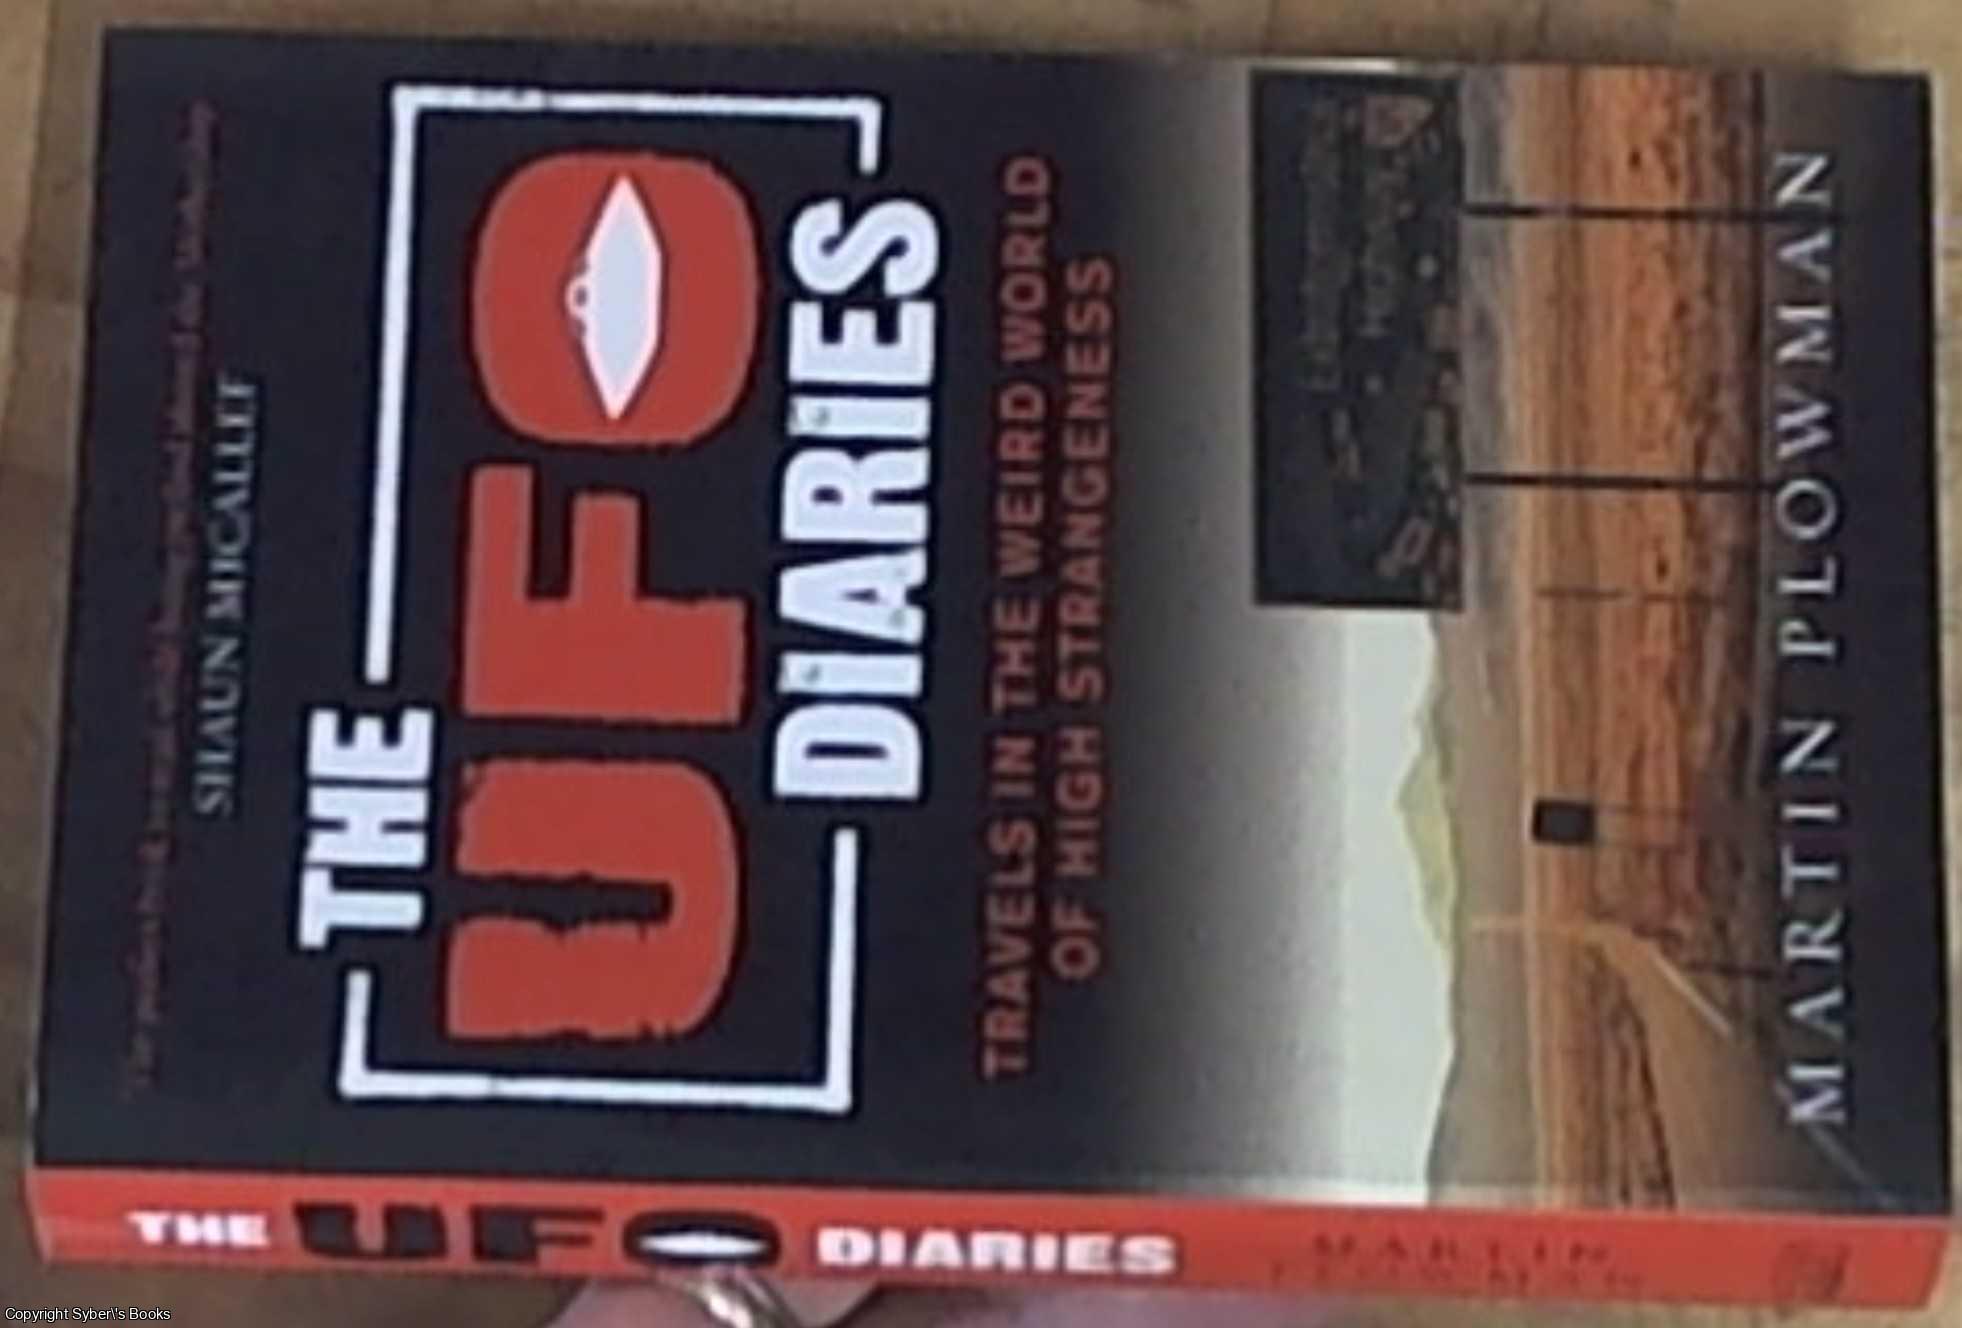 Plowman, Martin - The UFO Diaries; Travels in the Weird World of High Strangeness